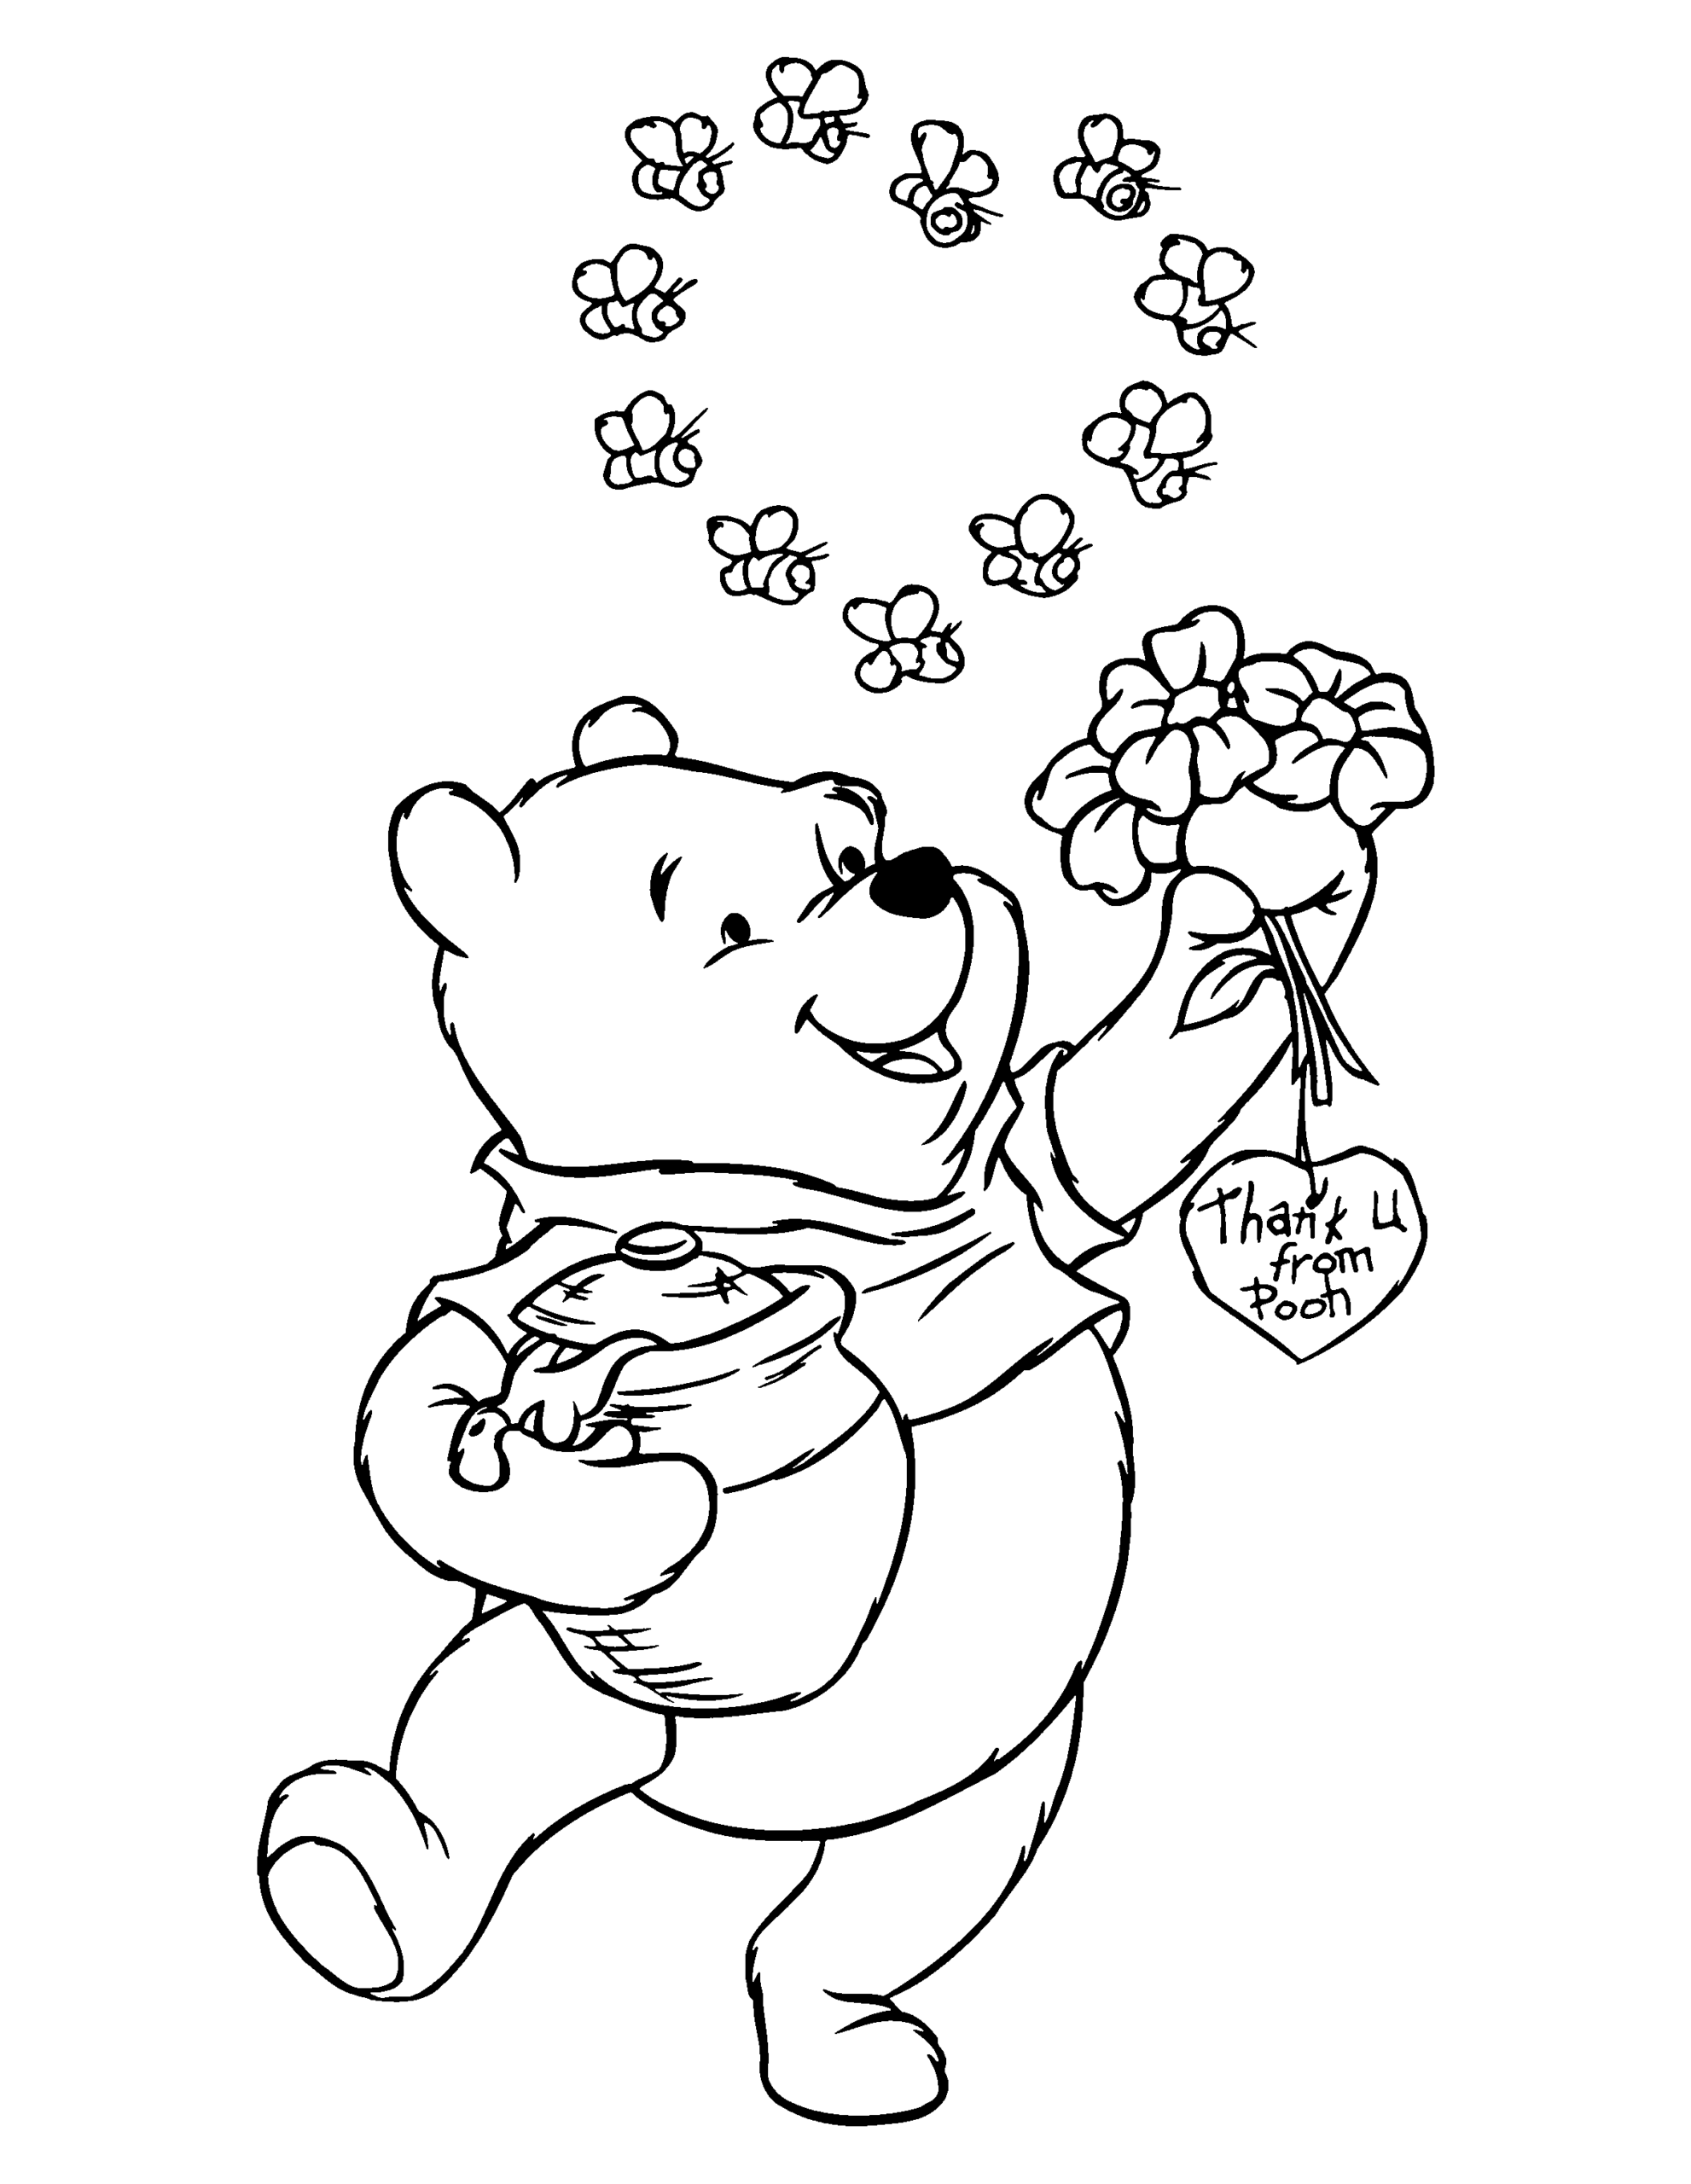 Winnie the Pooh Coloring Pages Cartoons winnie the pooh 47 Printable 2020 7157 Coloring4free